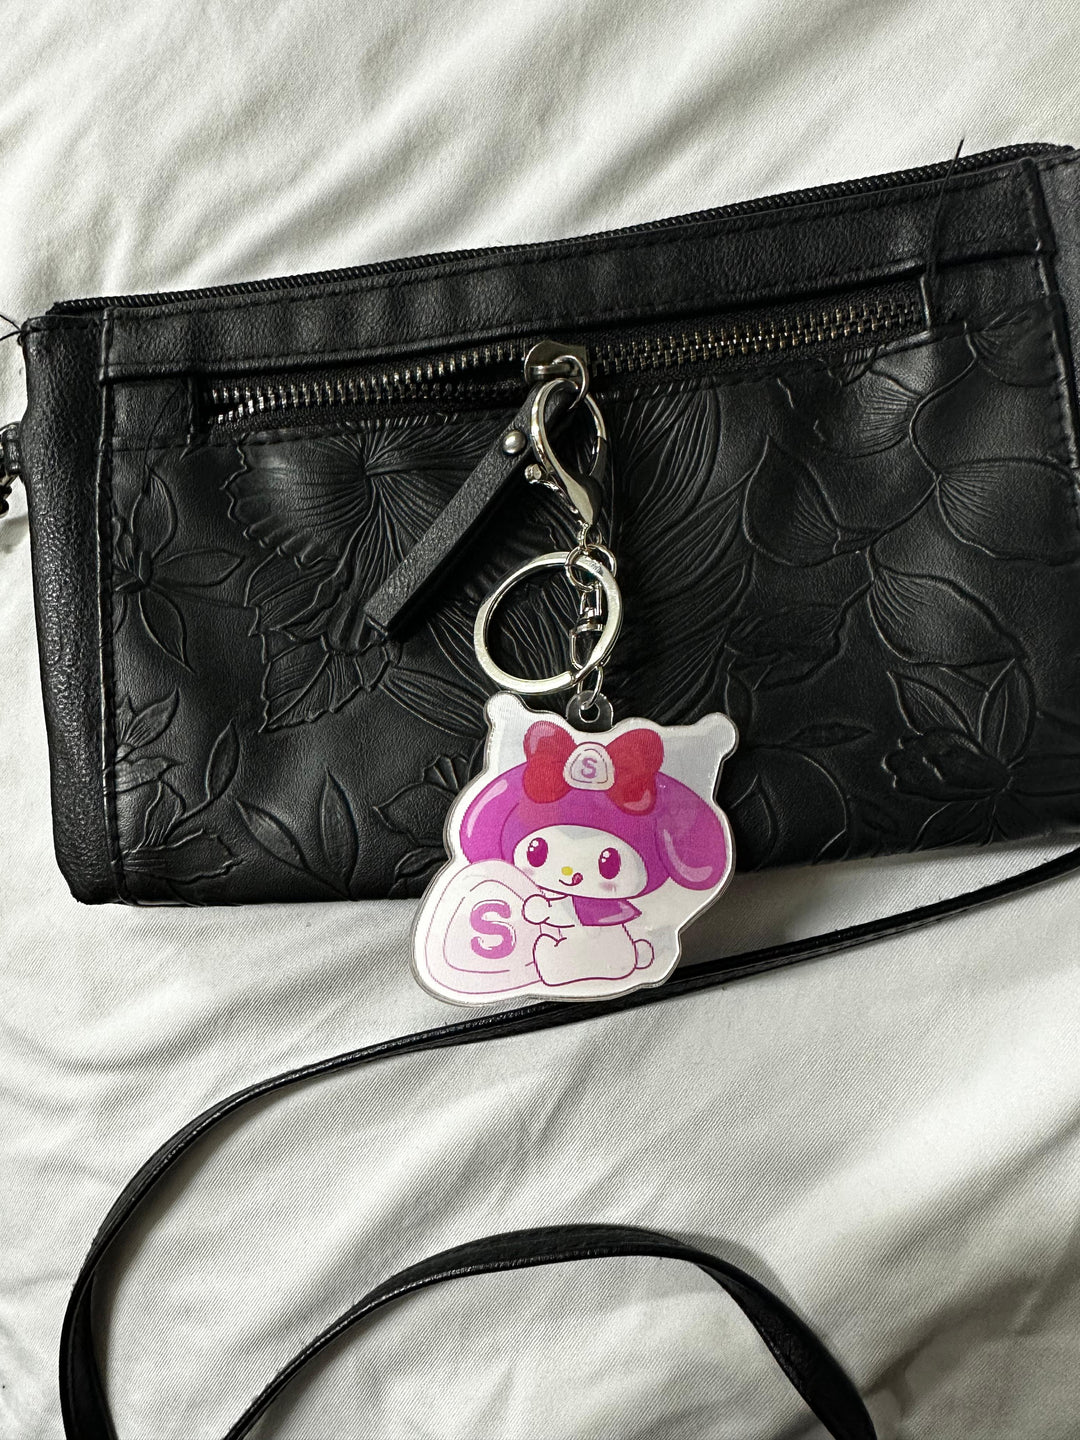 Show your love off for Sanrio with our new 3D Motion Keychains | Here at OzJapWear we have the coolest Anime Clothing | Upgrade your style with our anime brand.